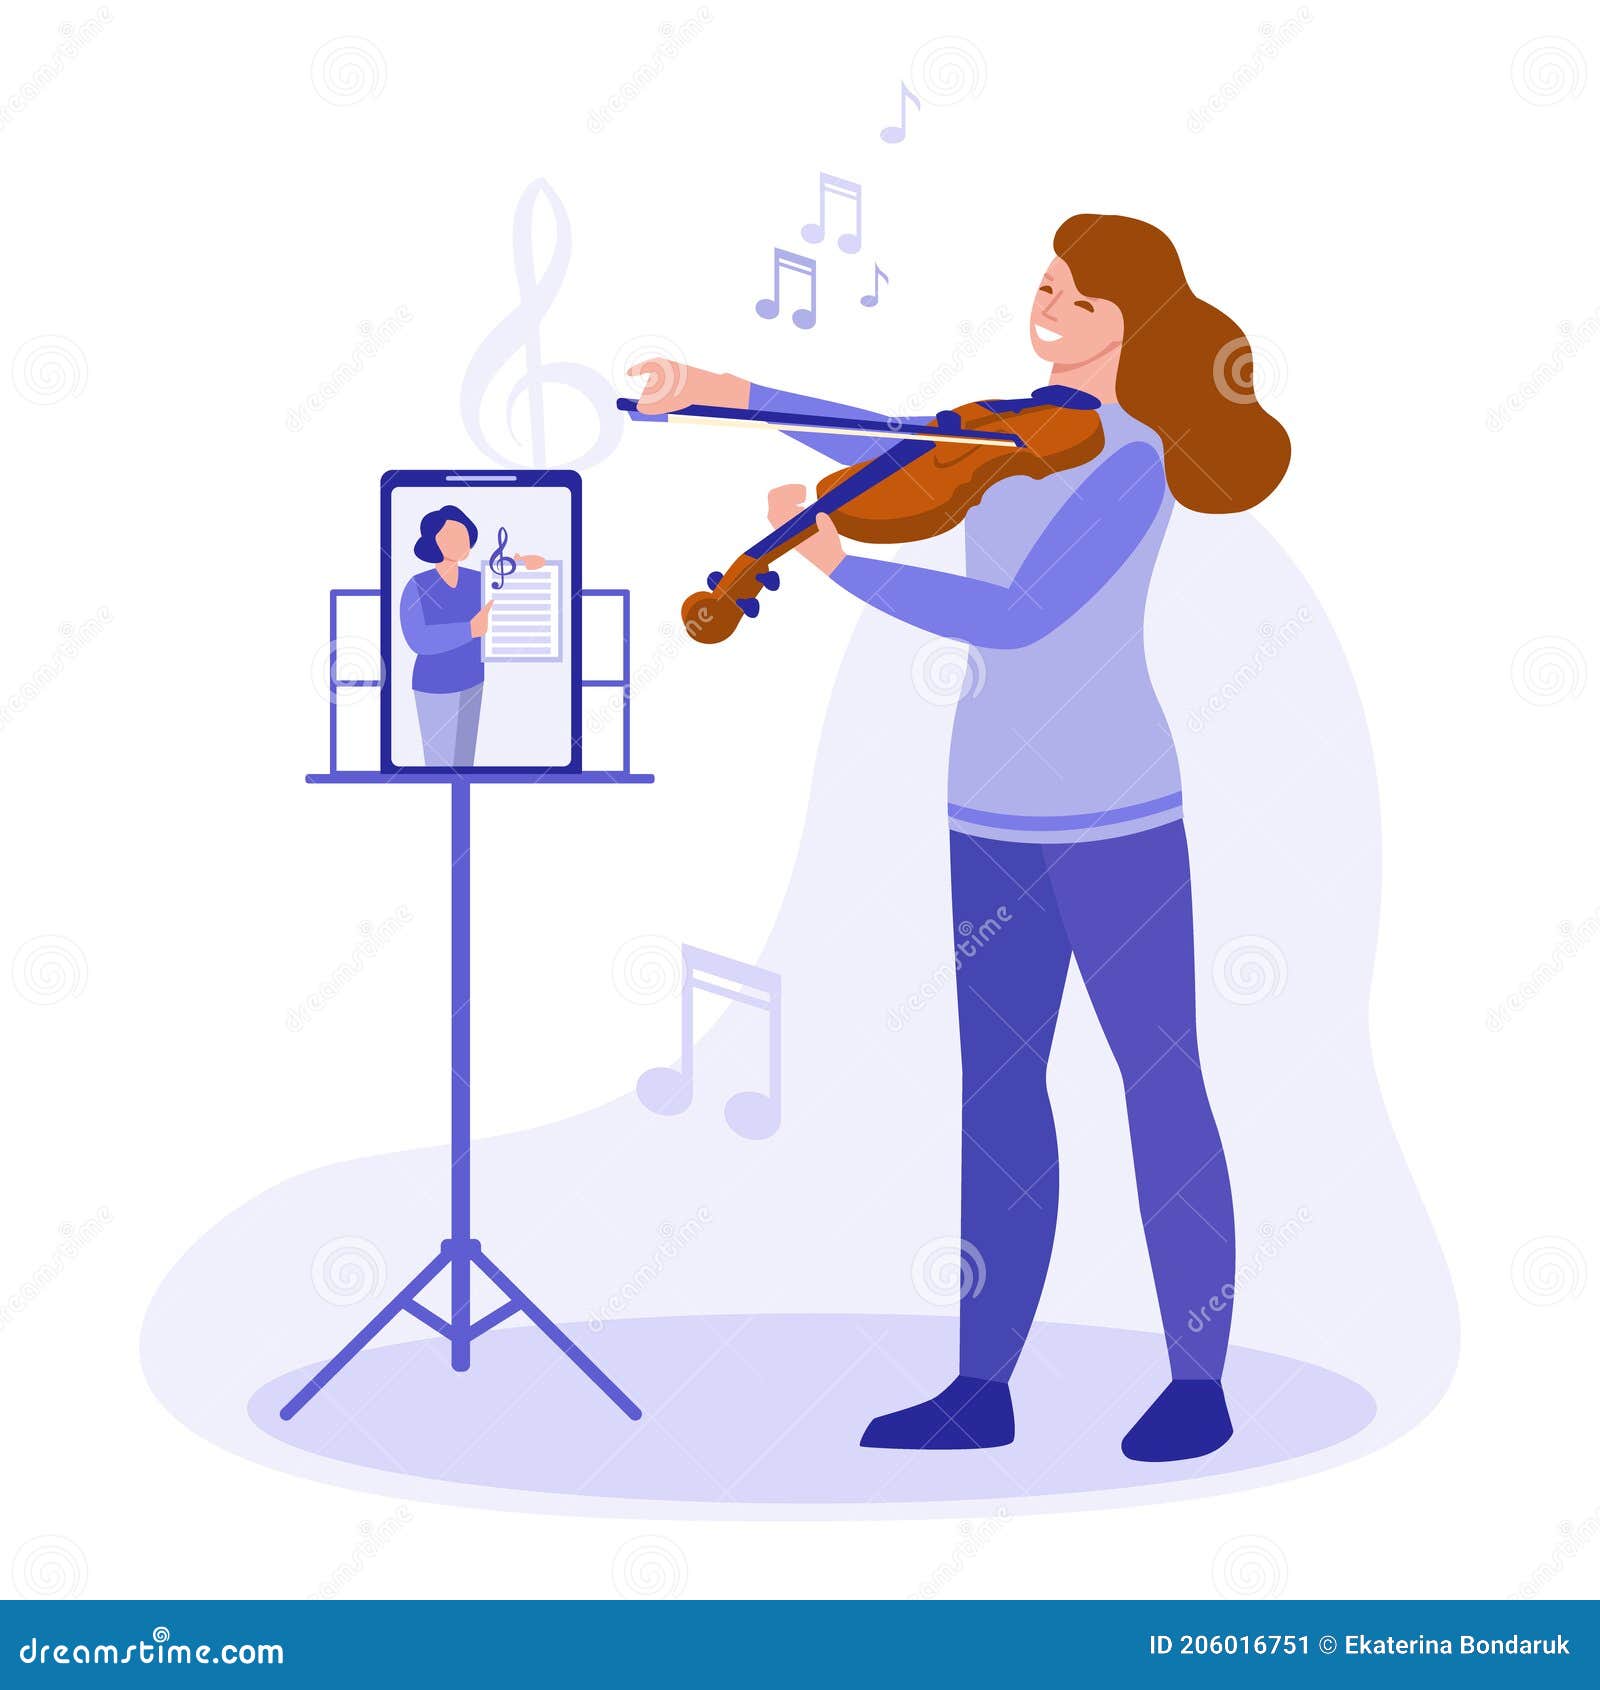 The Concept of Learning To Play the Violin Online. Girl Playing Violin and Watching a Lesson on a Tablet Stock Illustration - Illustration of instrumental: 206016751